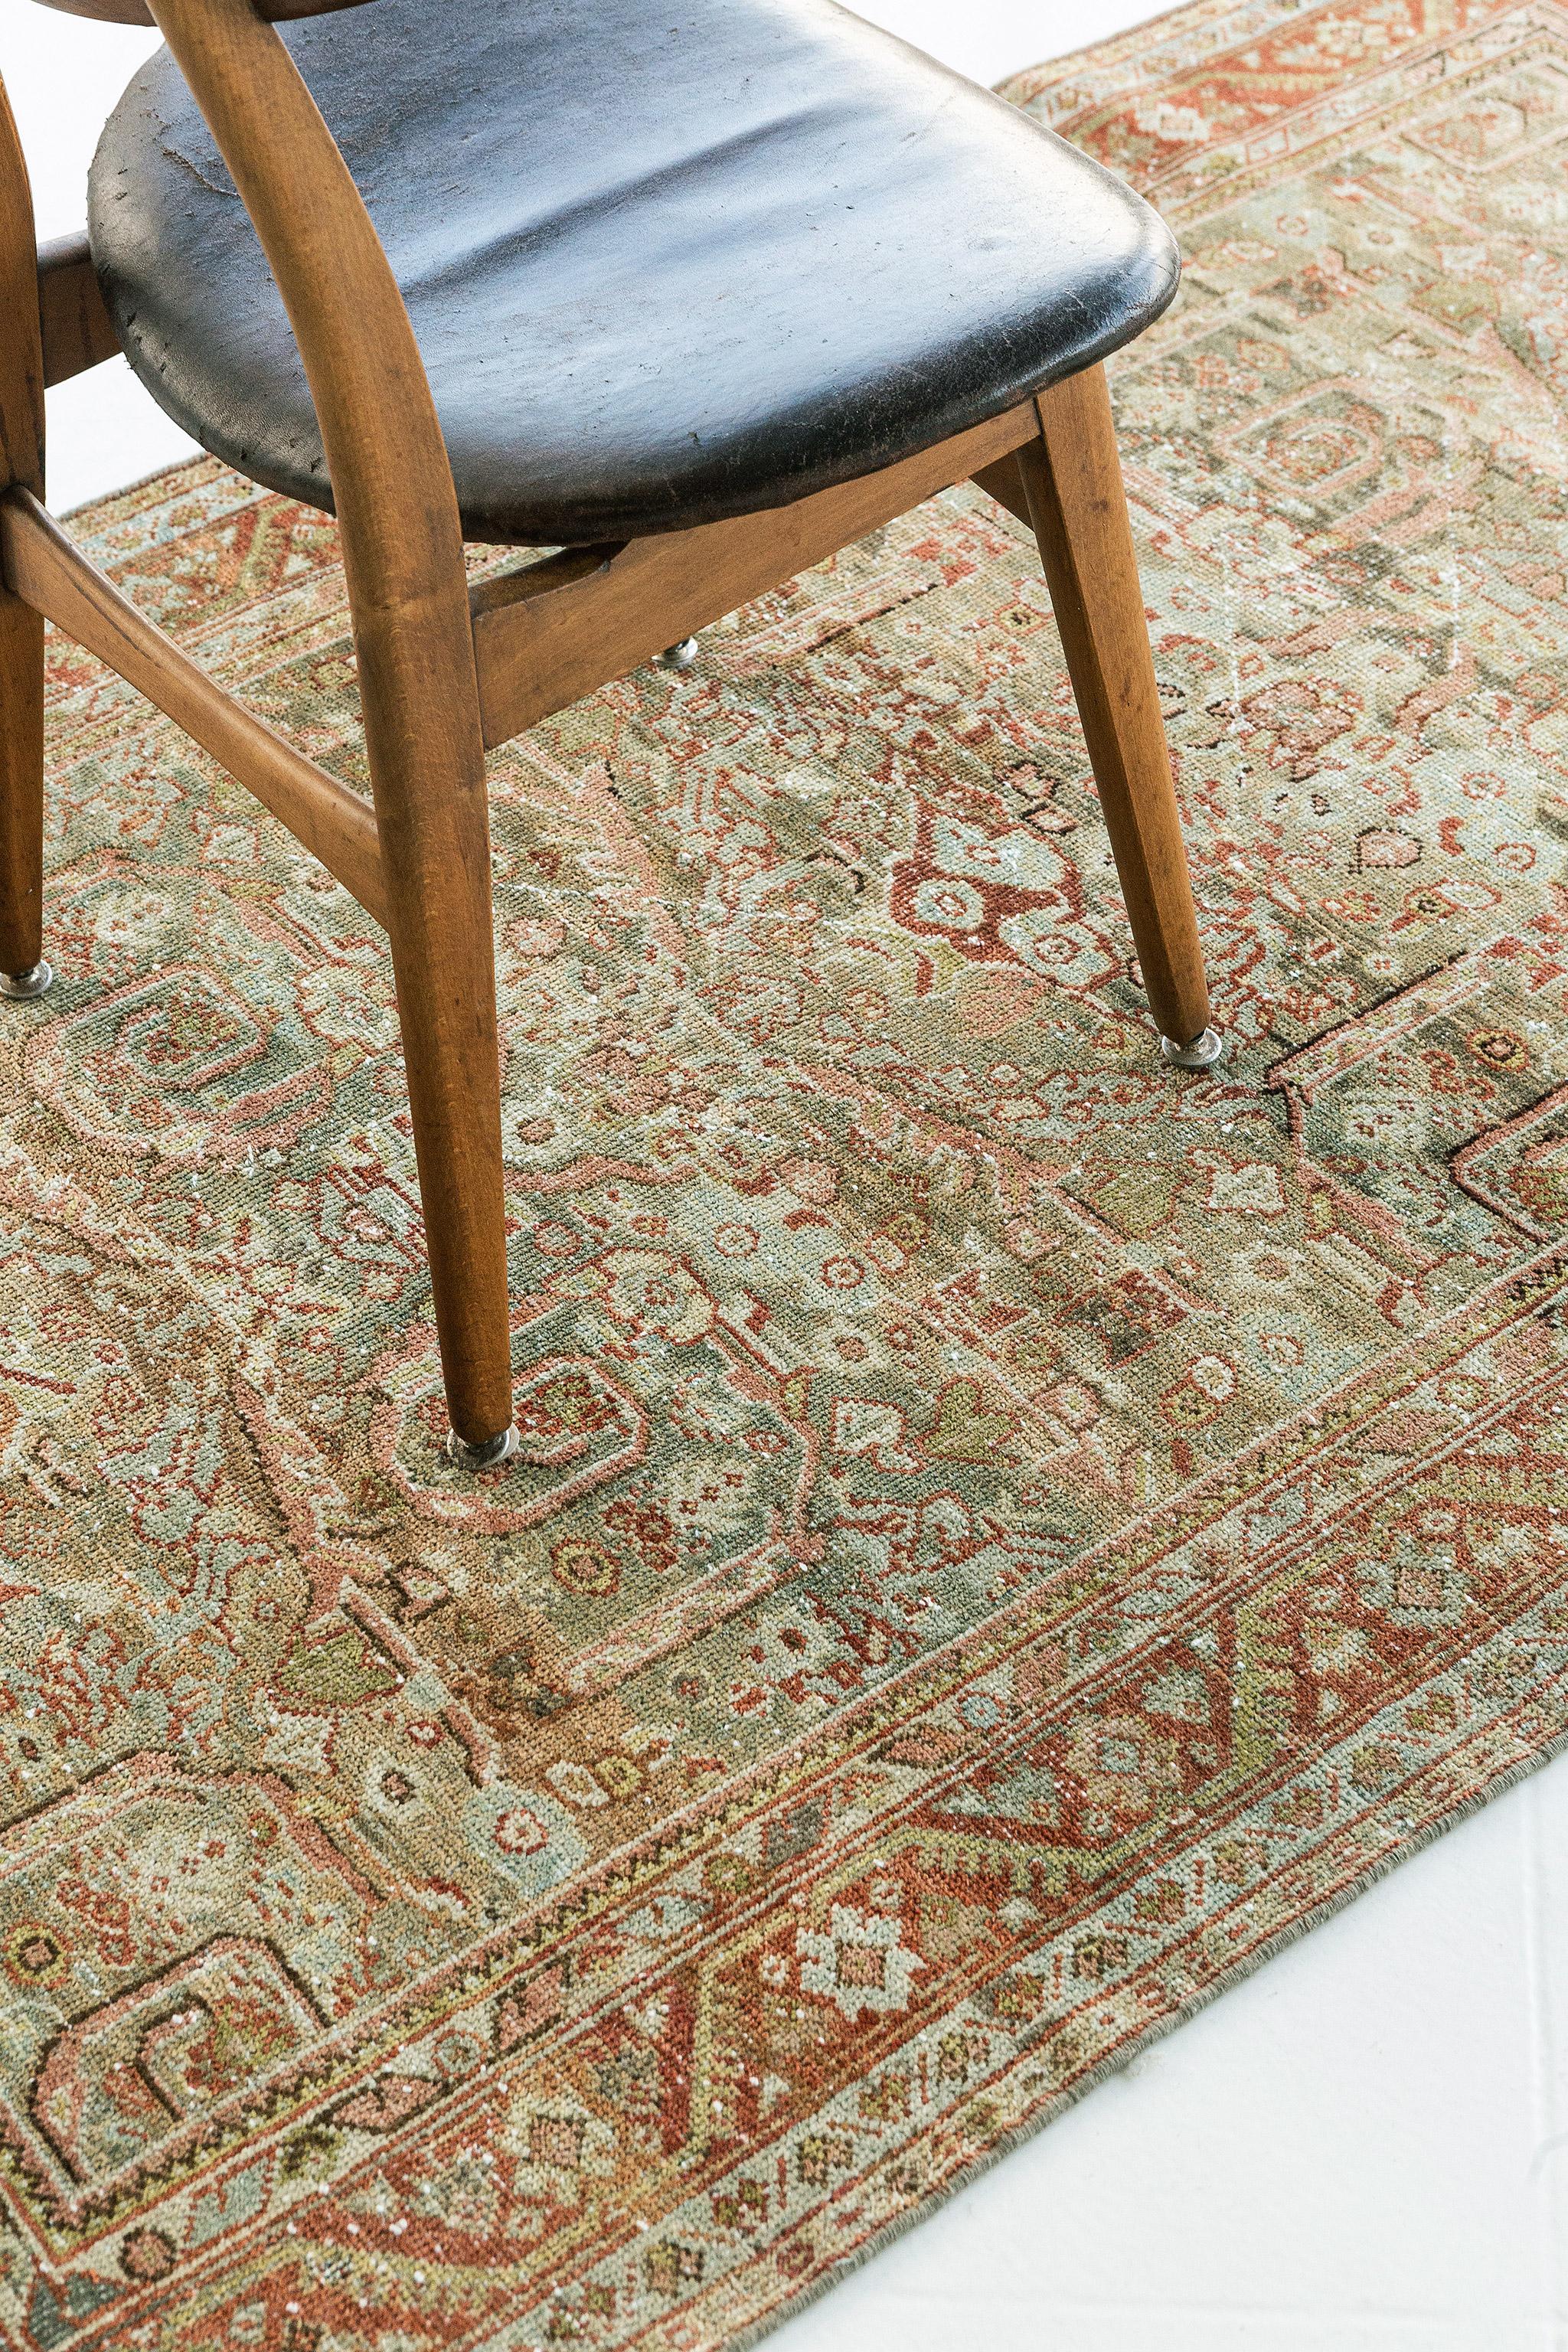 With captivating elements of curved lines and a subdued color scheme, this antique Persian Malayer rug embodies an all-over florid patterns that tells a story. The antique Malayer rug is adorned with an all-over pattern of swirls, curved sickle